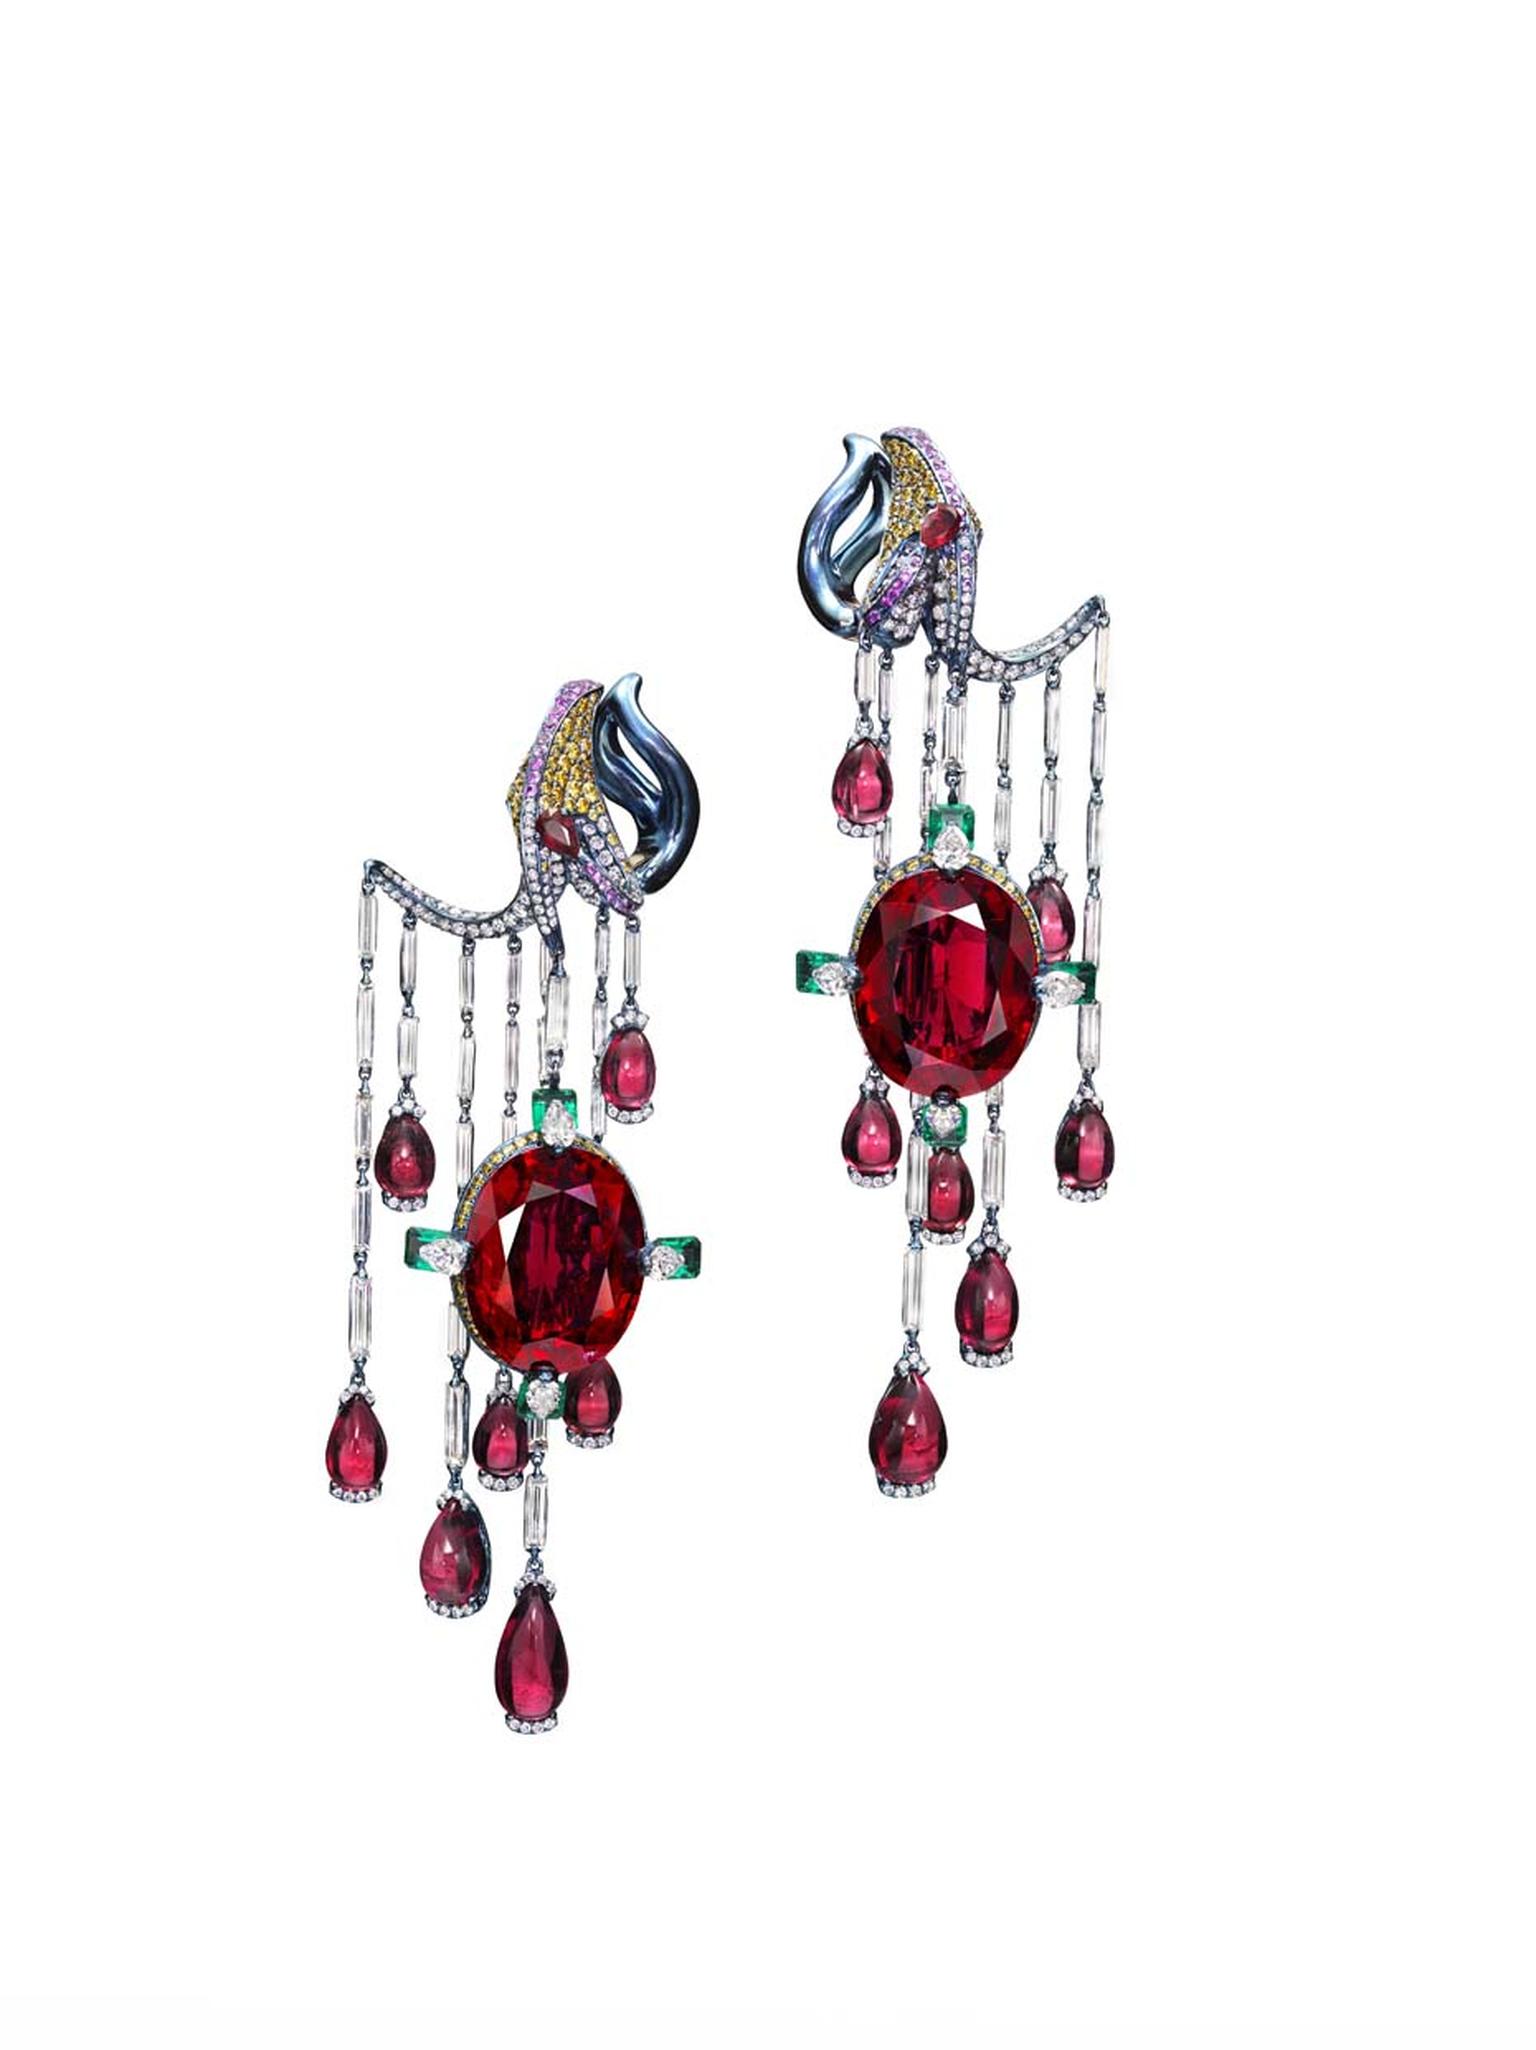 Wallace Chan Vermillion Veil earring set with two rubellites weighing 20.96ct and 20.03ct, diamonds, emeralds, rubies and yellow diamonds